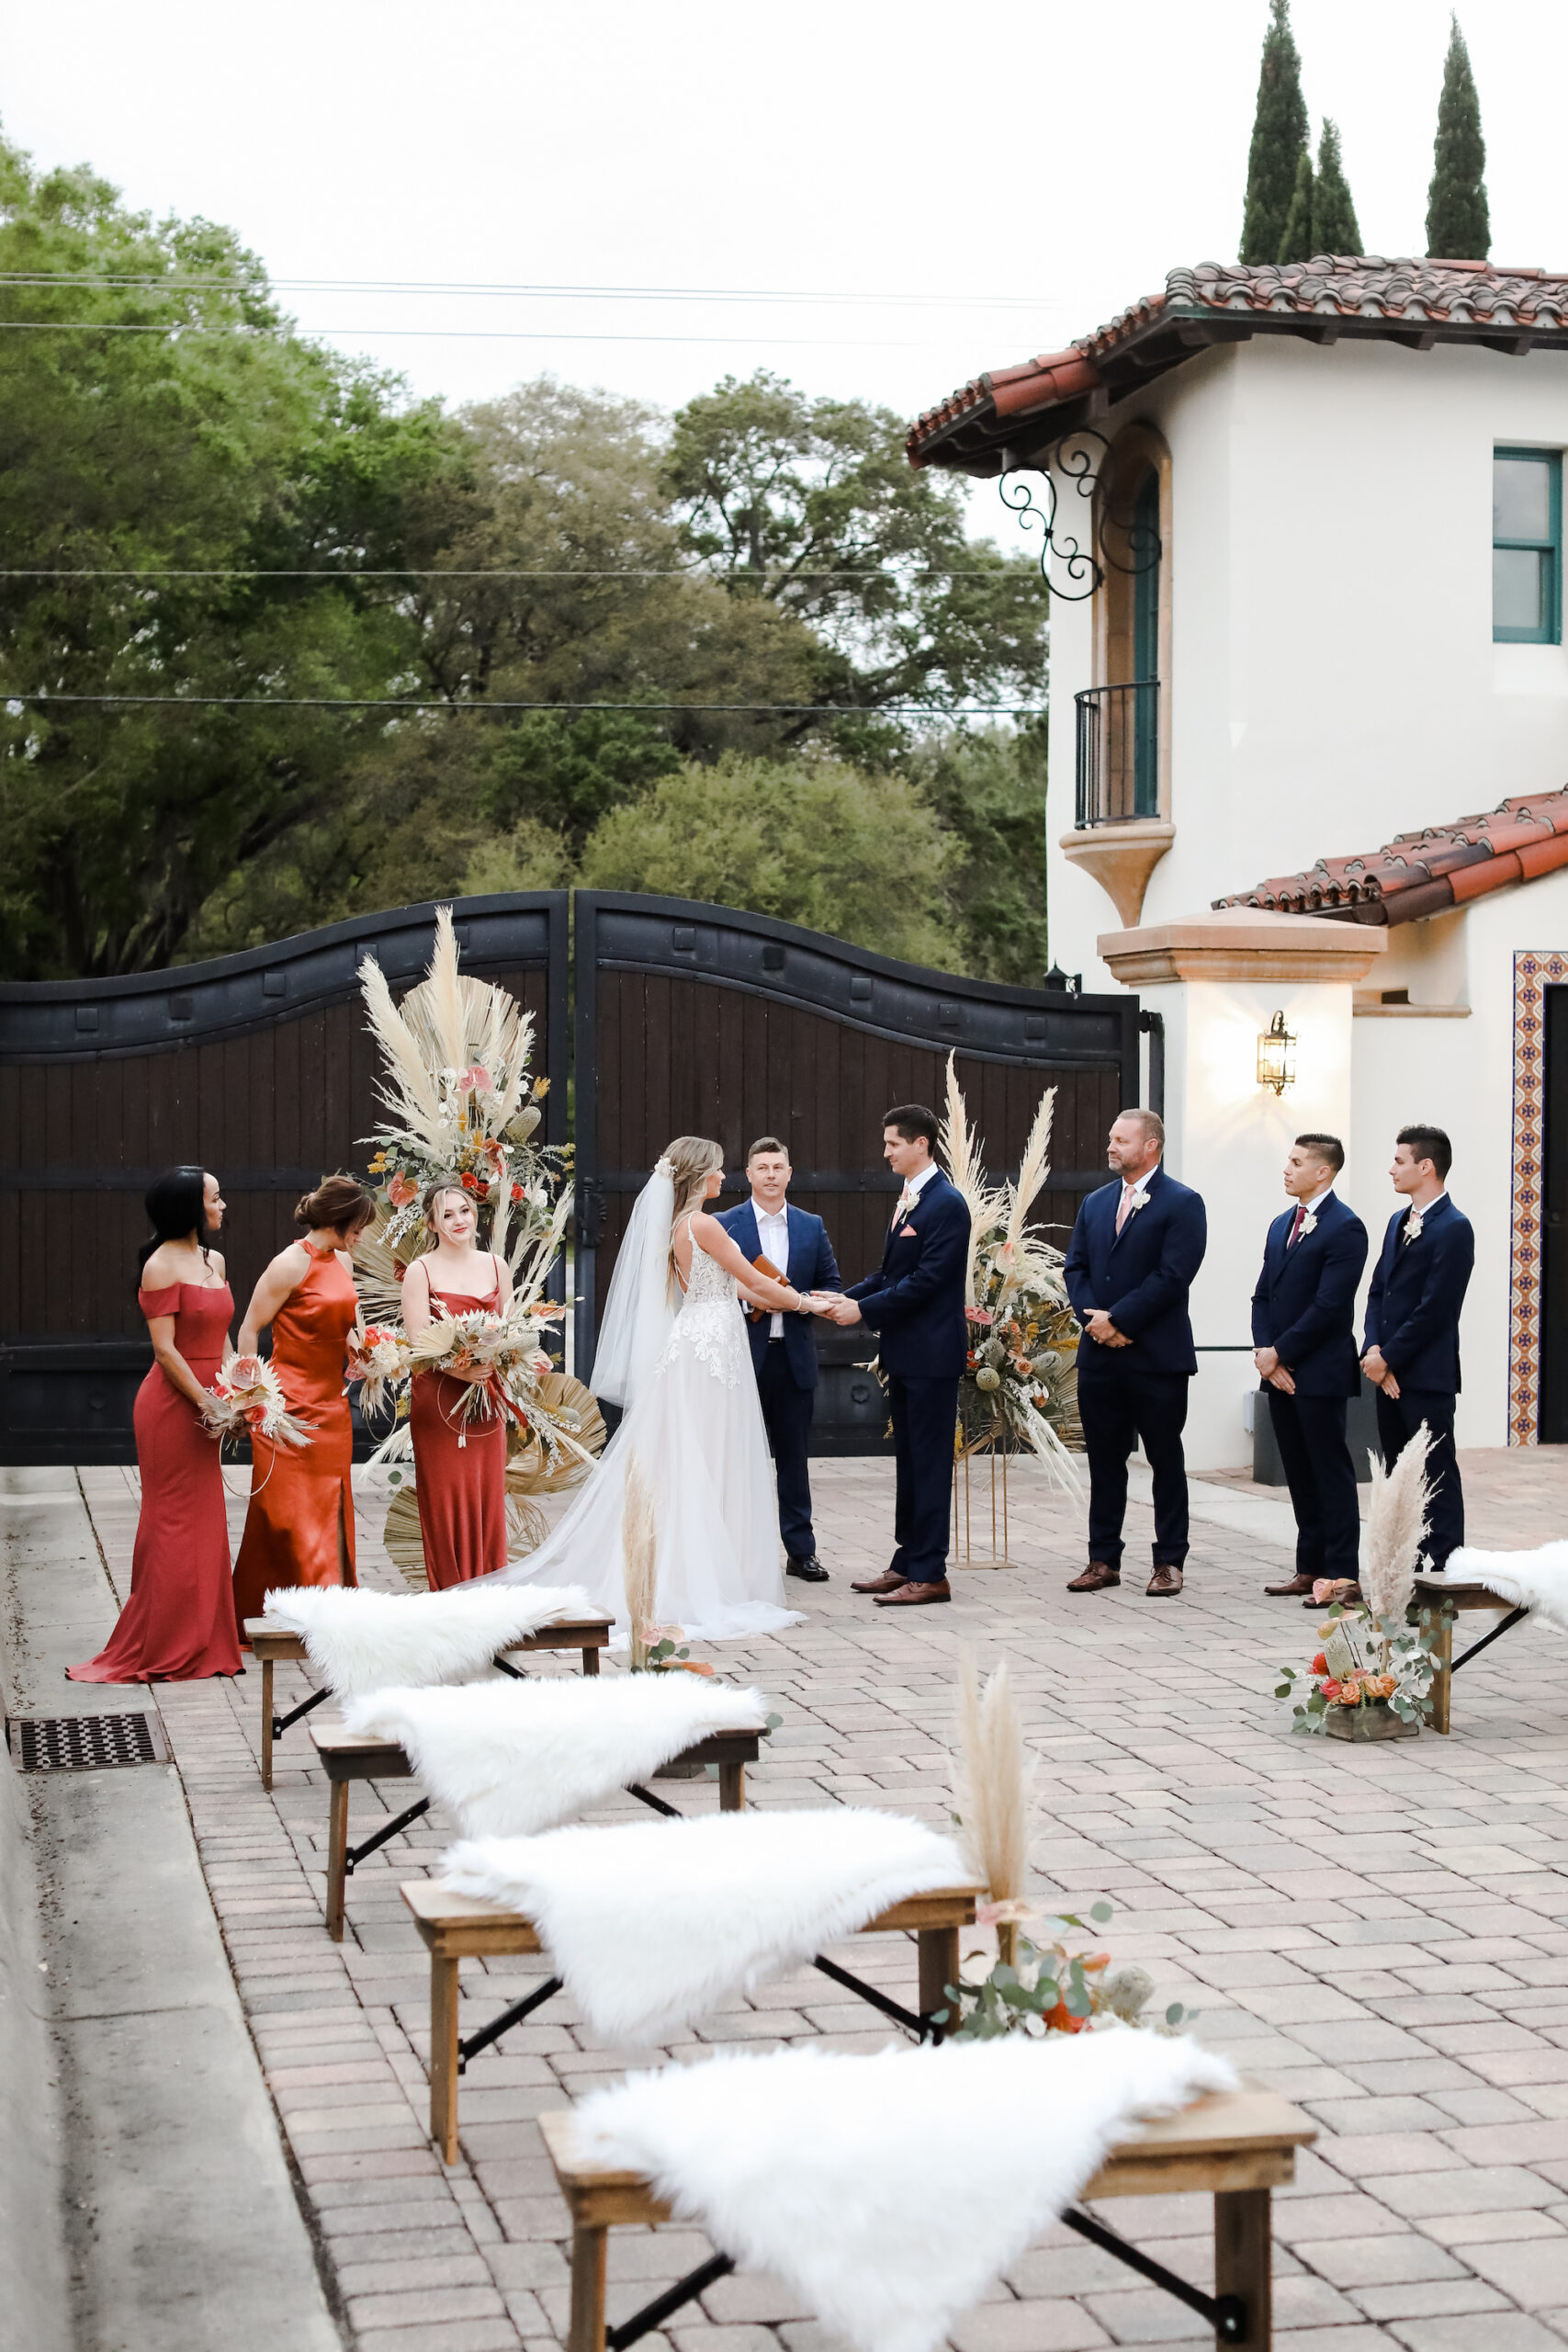 Outdoor Boho Winter Wedding Ceremony with Wooden Benches and Fur | Tampa Bay Wedding Venue Mision Lago Estate | Rentals Gabro Event Services